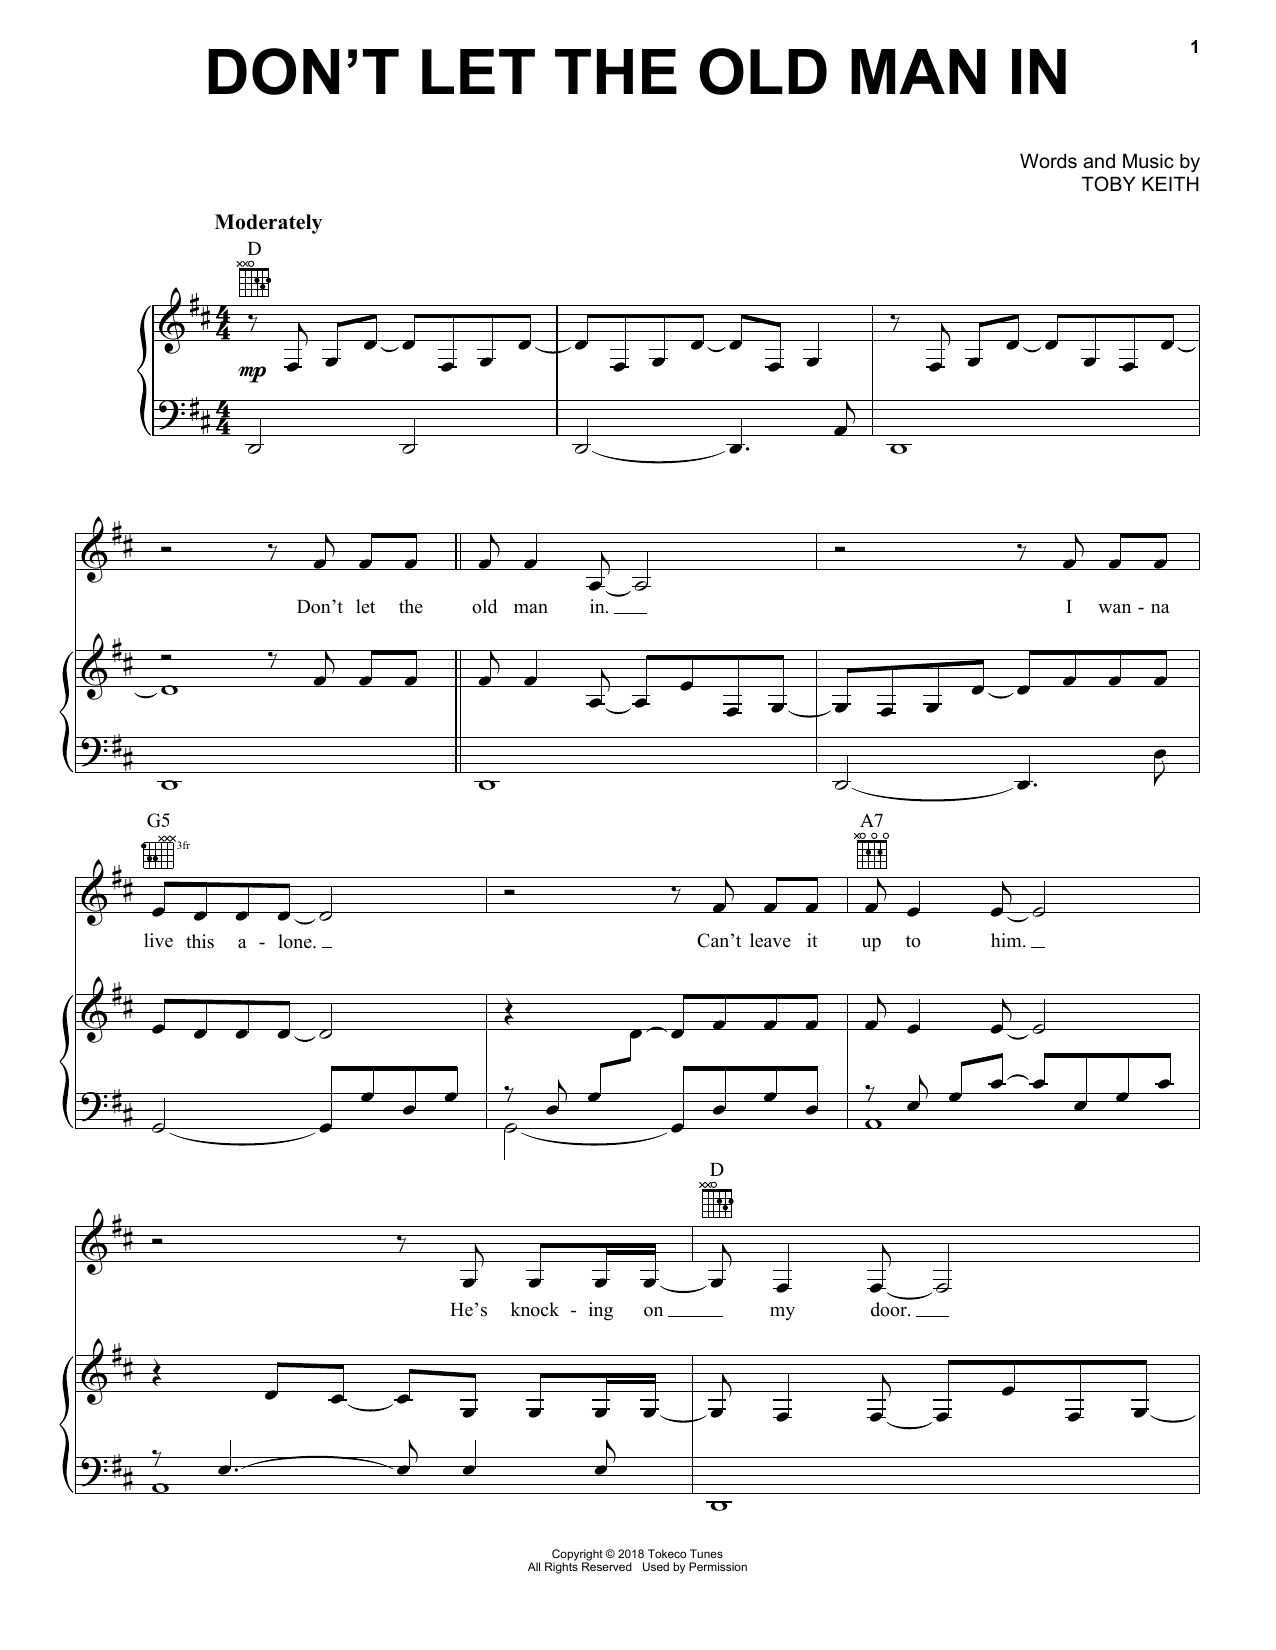 Toby Keith Don't Let The Old Man In sheet music notes printable PDF score